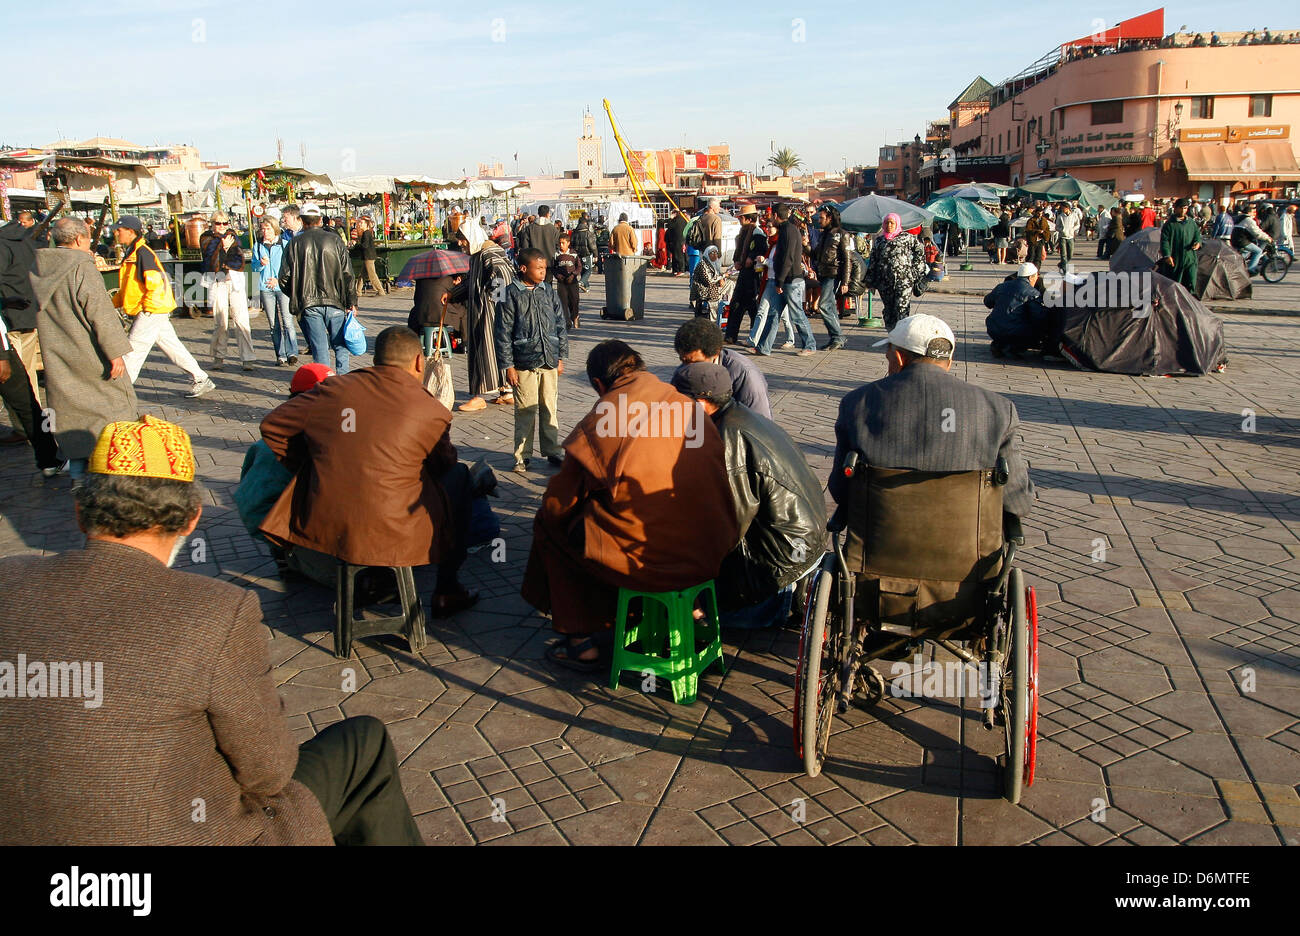 Crowded square in central Marrakesh. Stock Photo